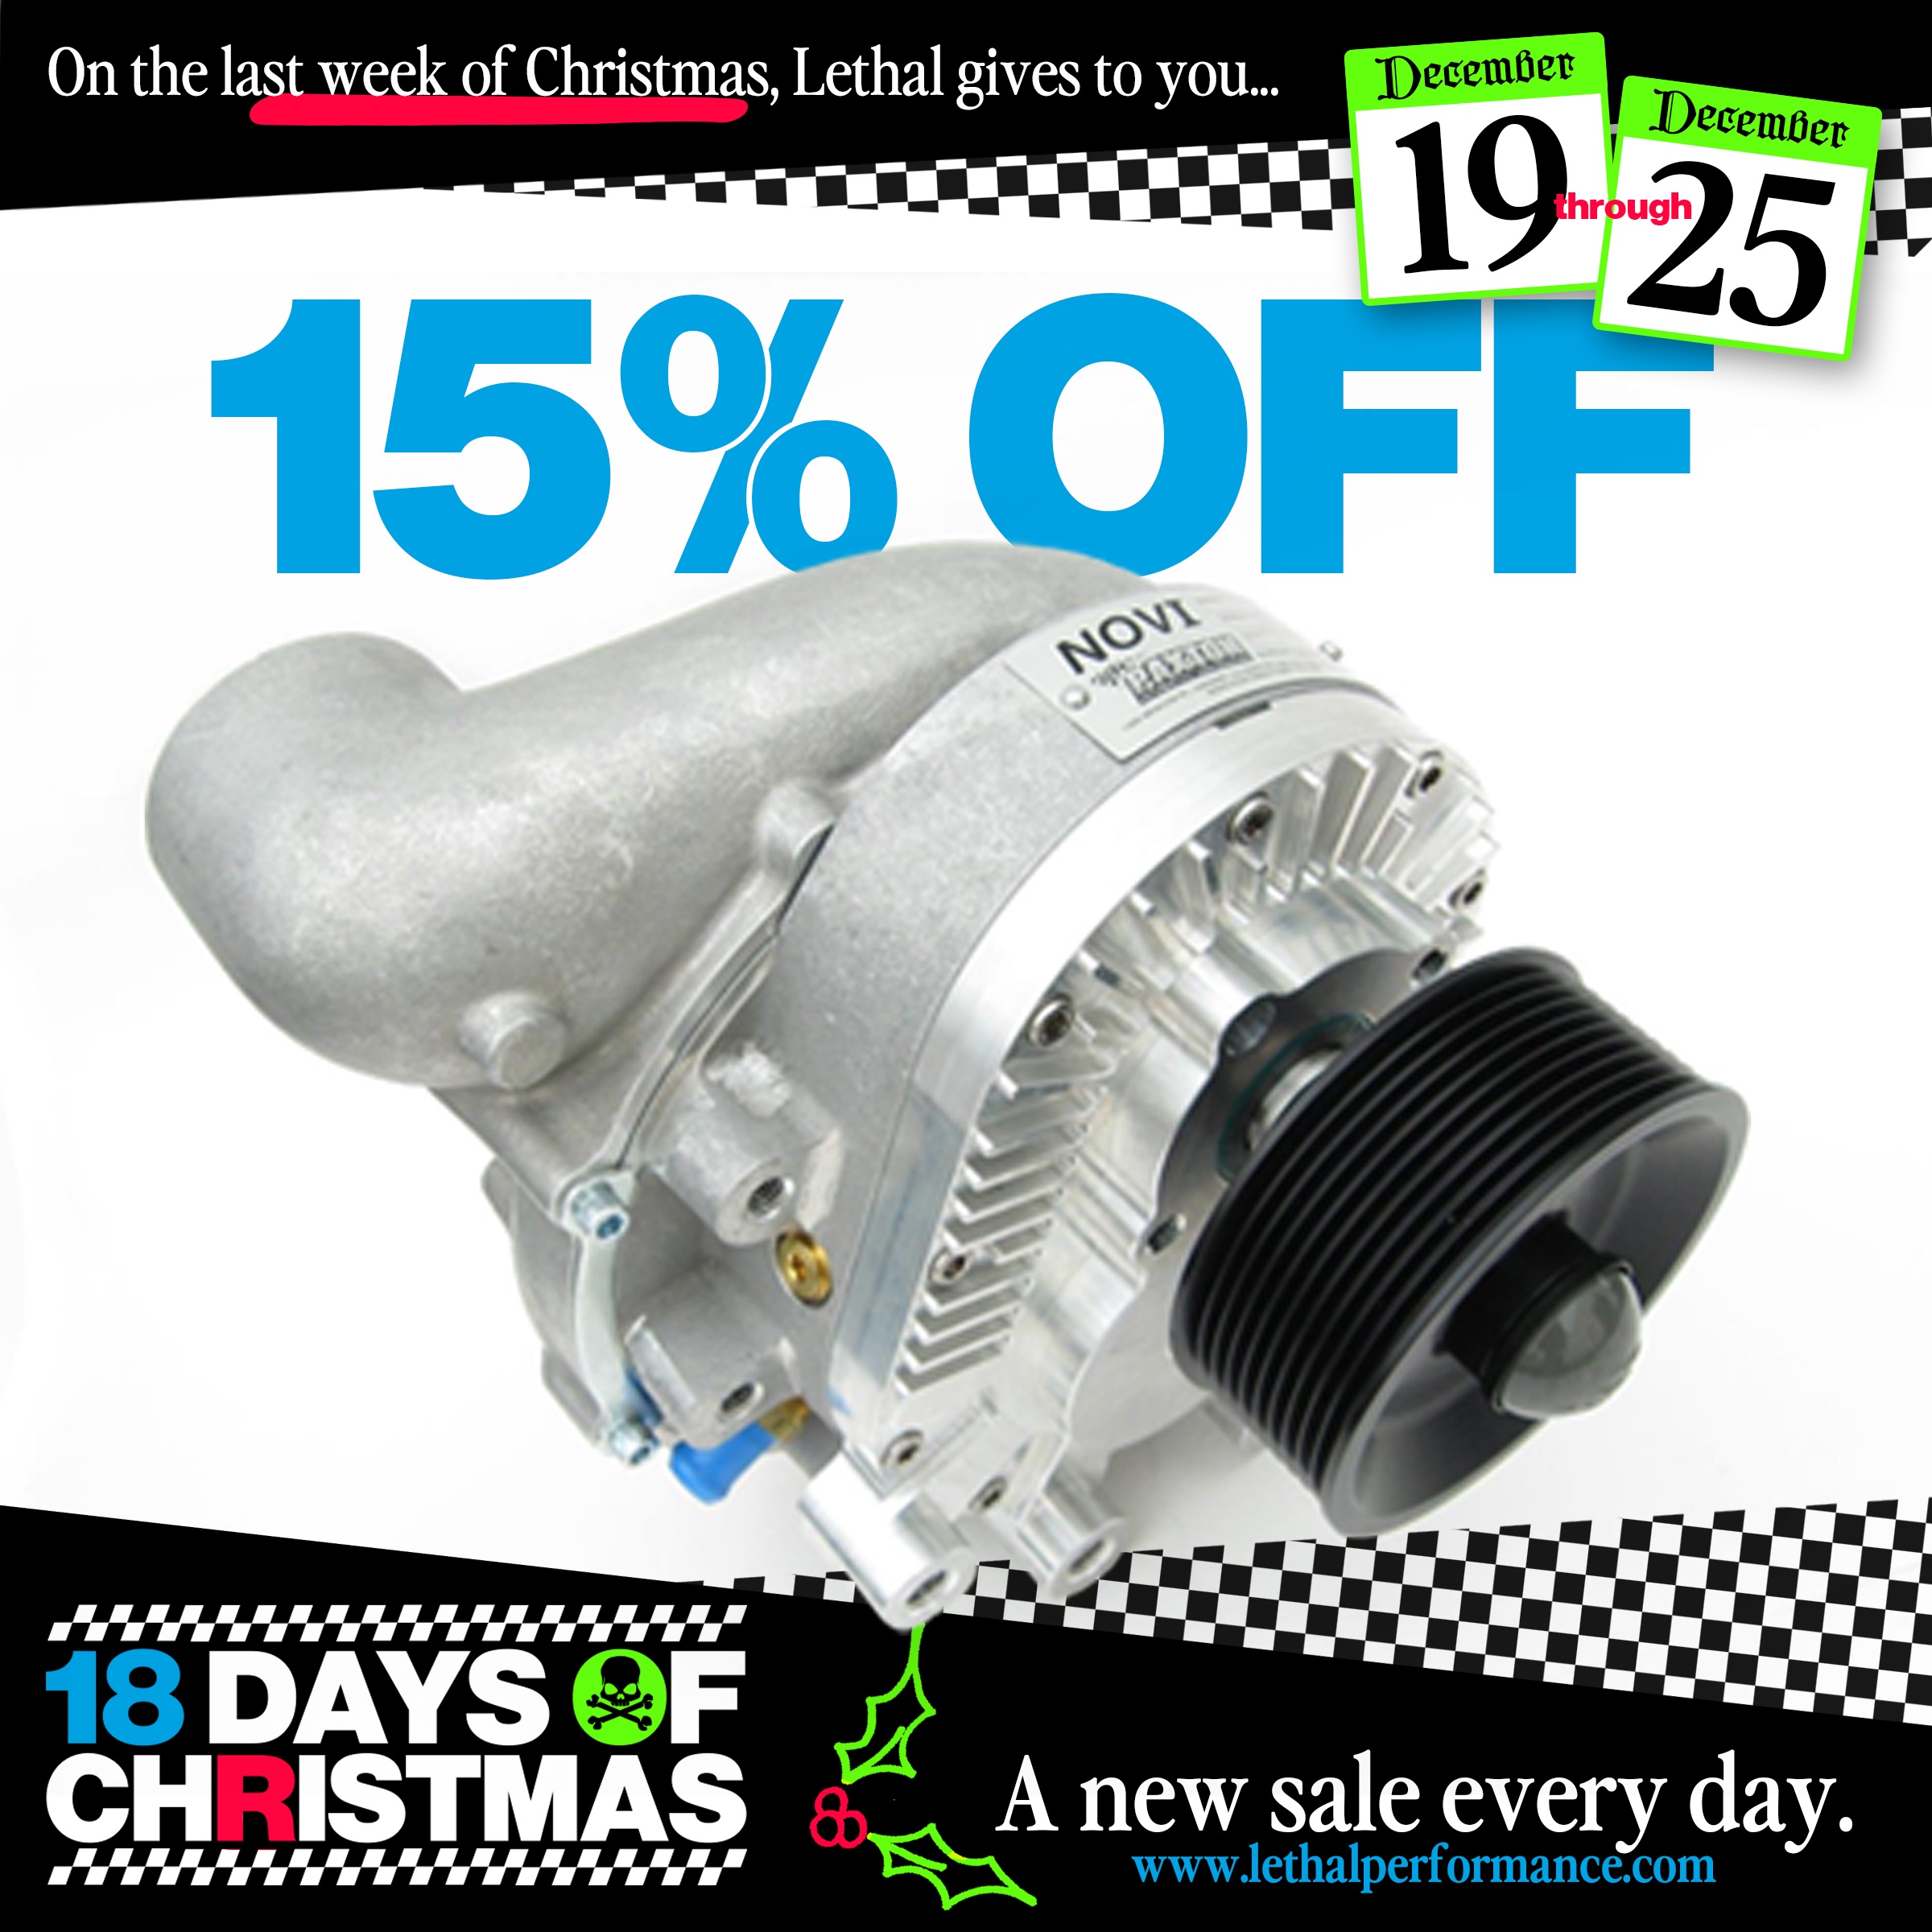 S650 Mustang Lethal Perfomance's 18 Days of Christmas SALES START NOW!! Paxton